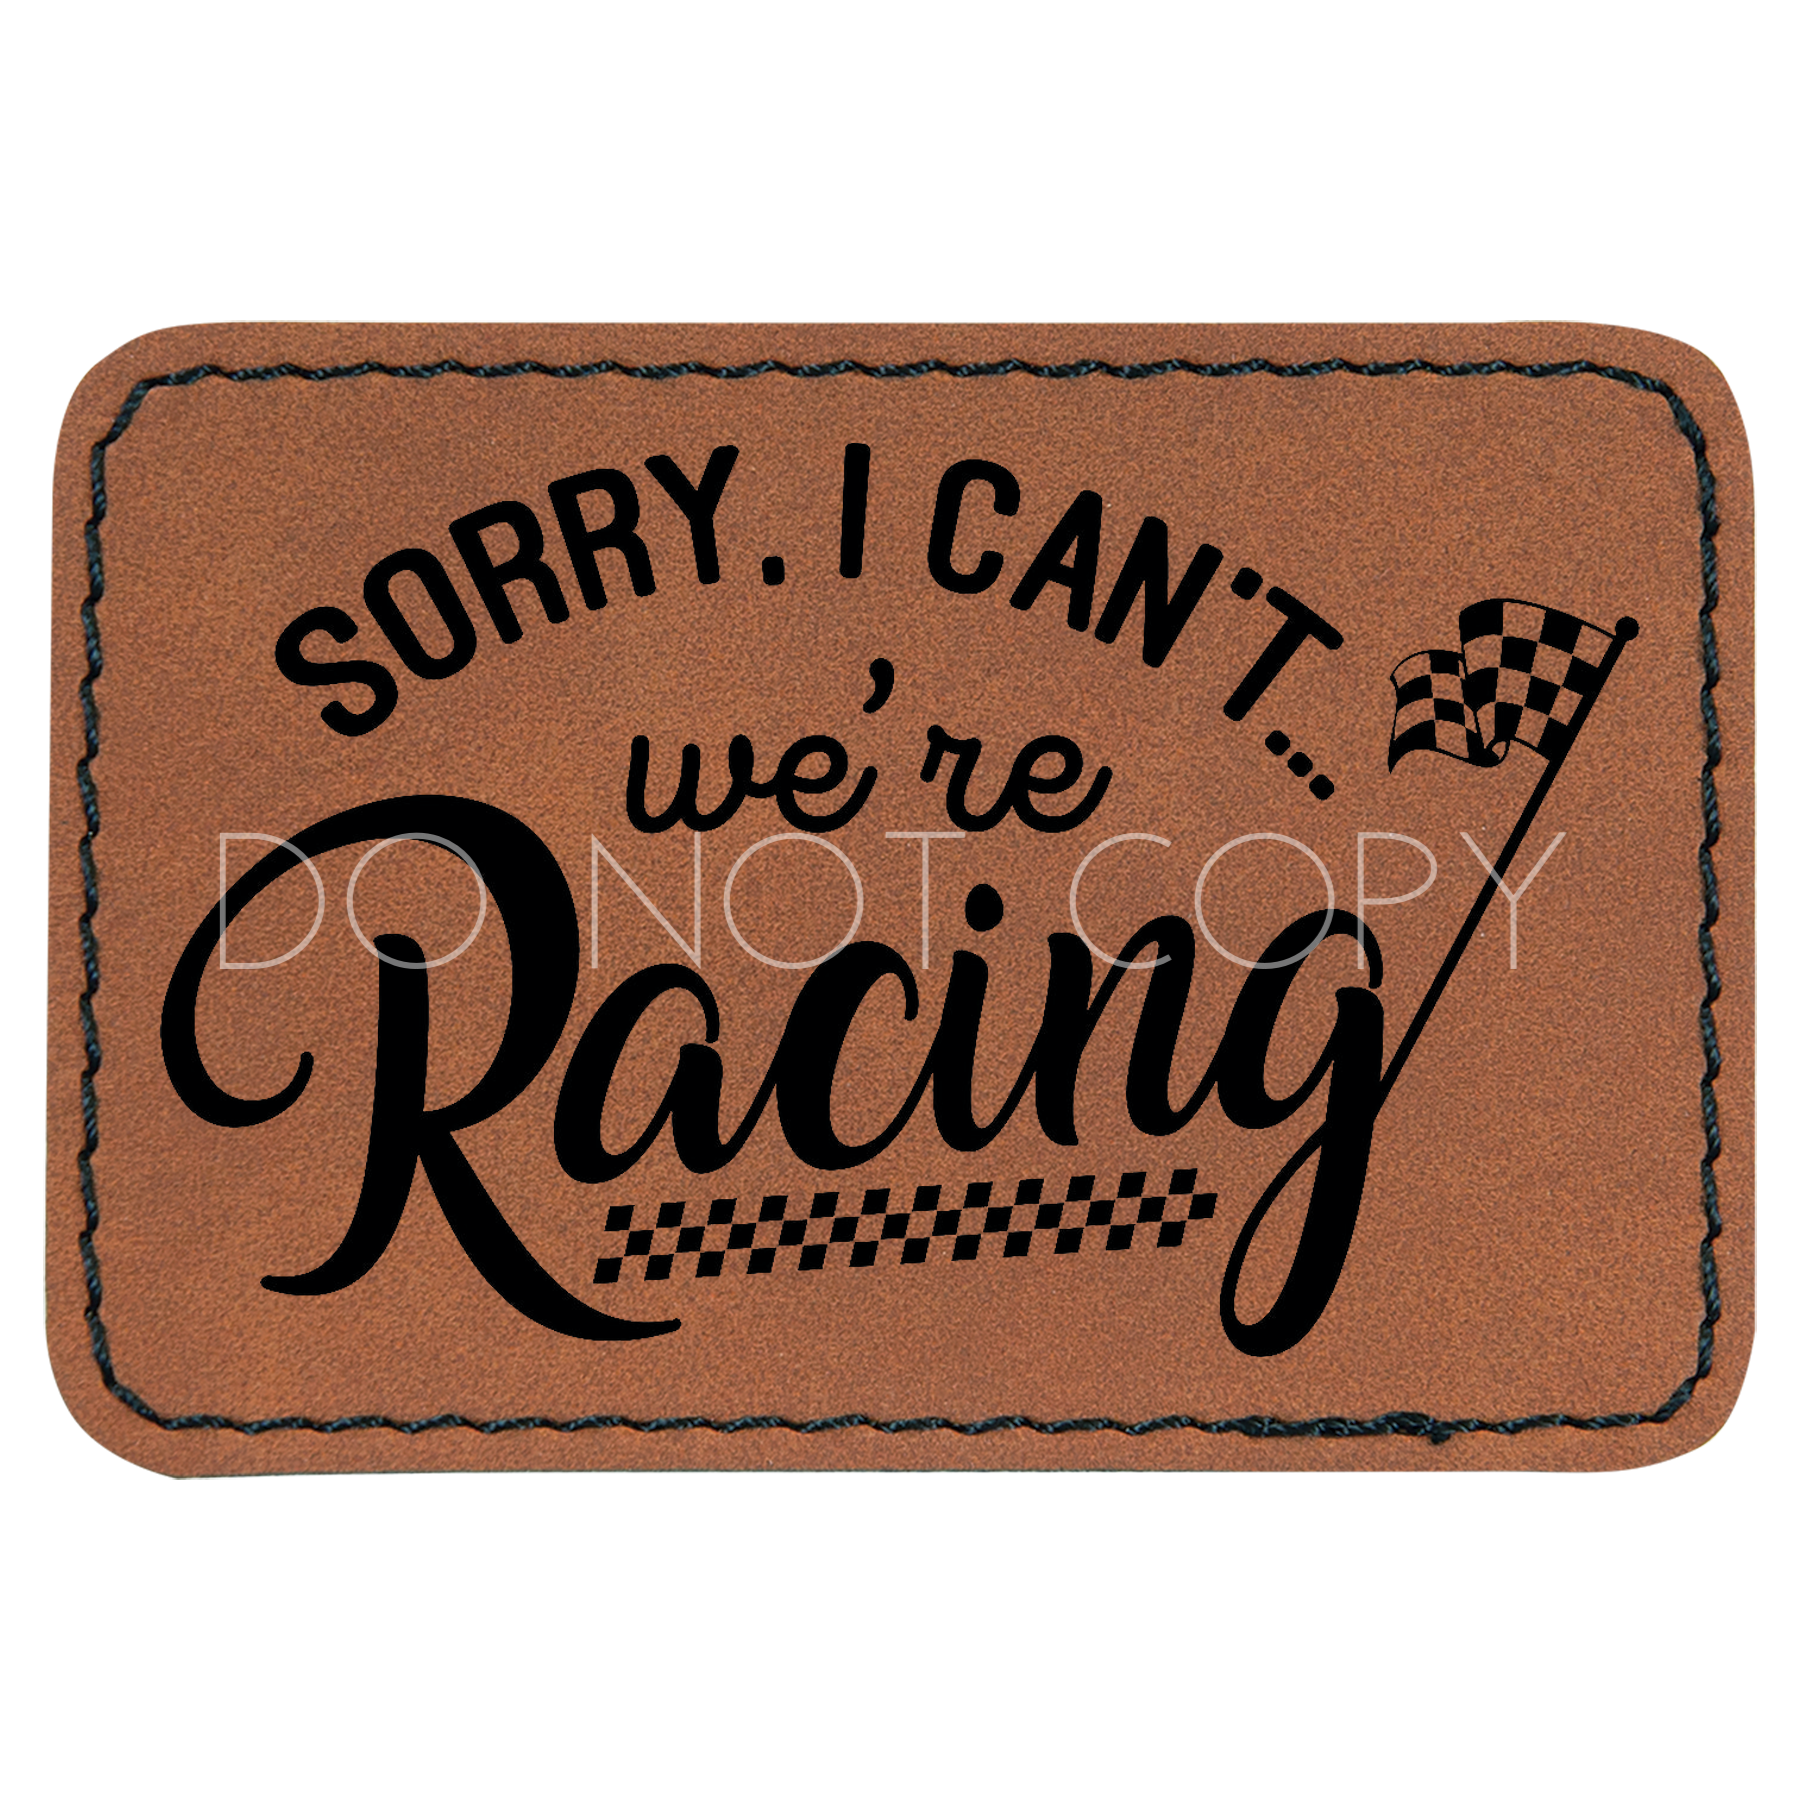 Sorry I Can't We Are Racing V. 2 Patch